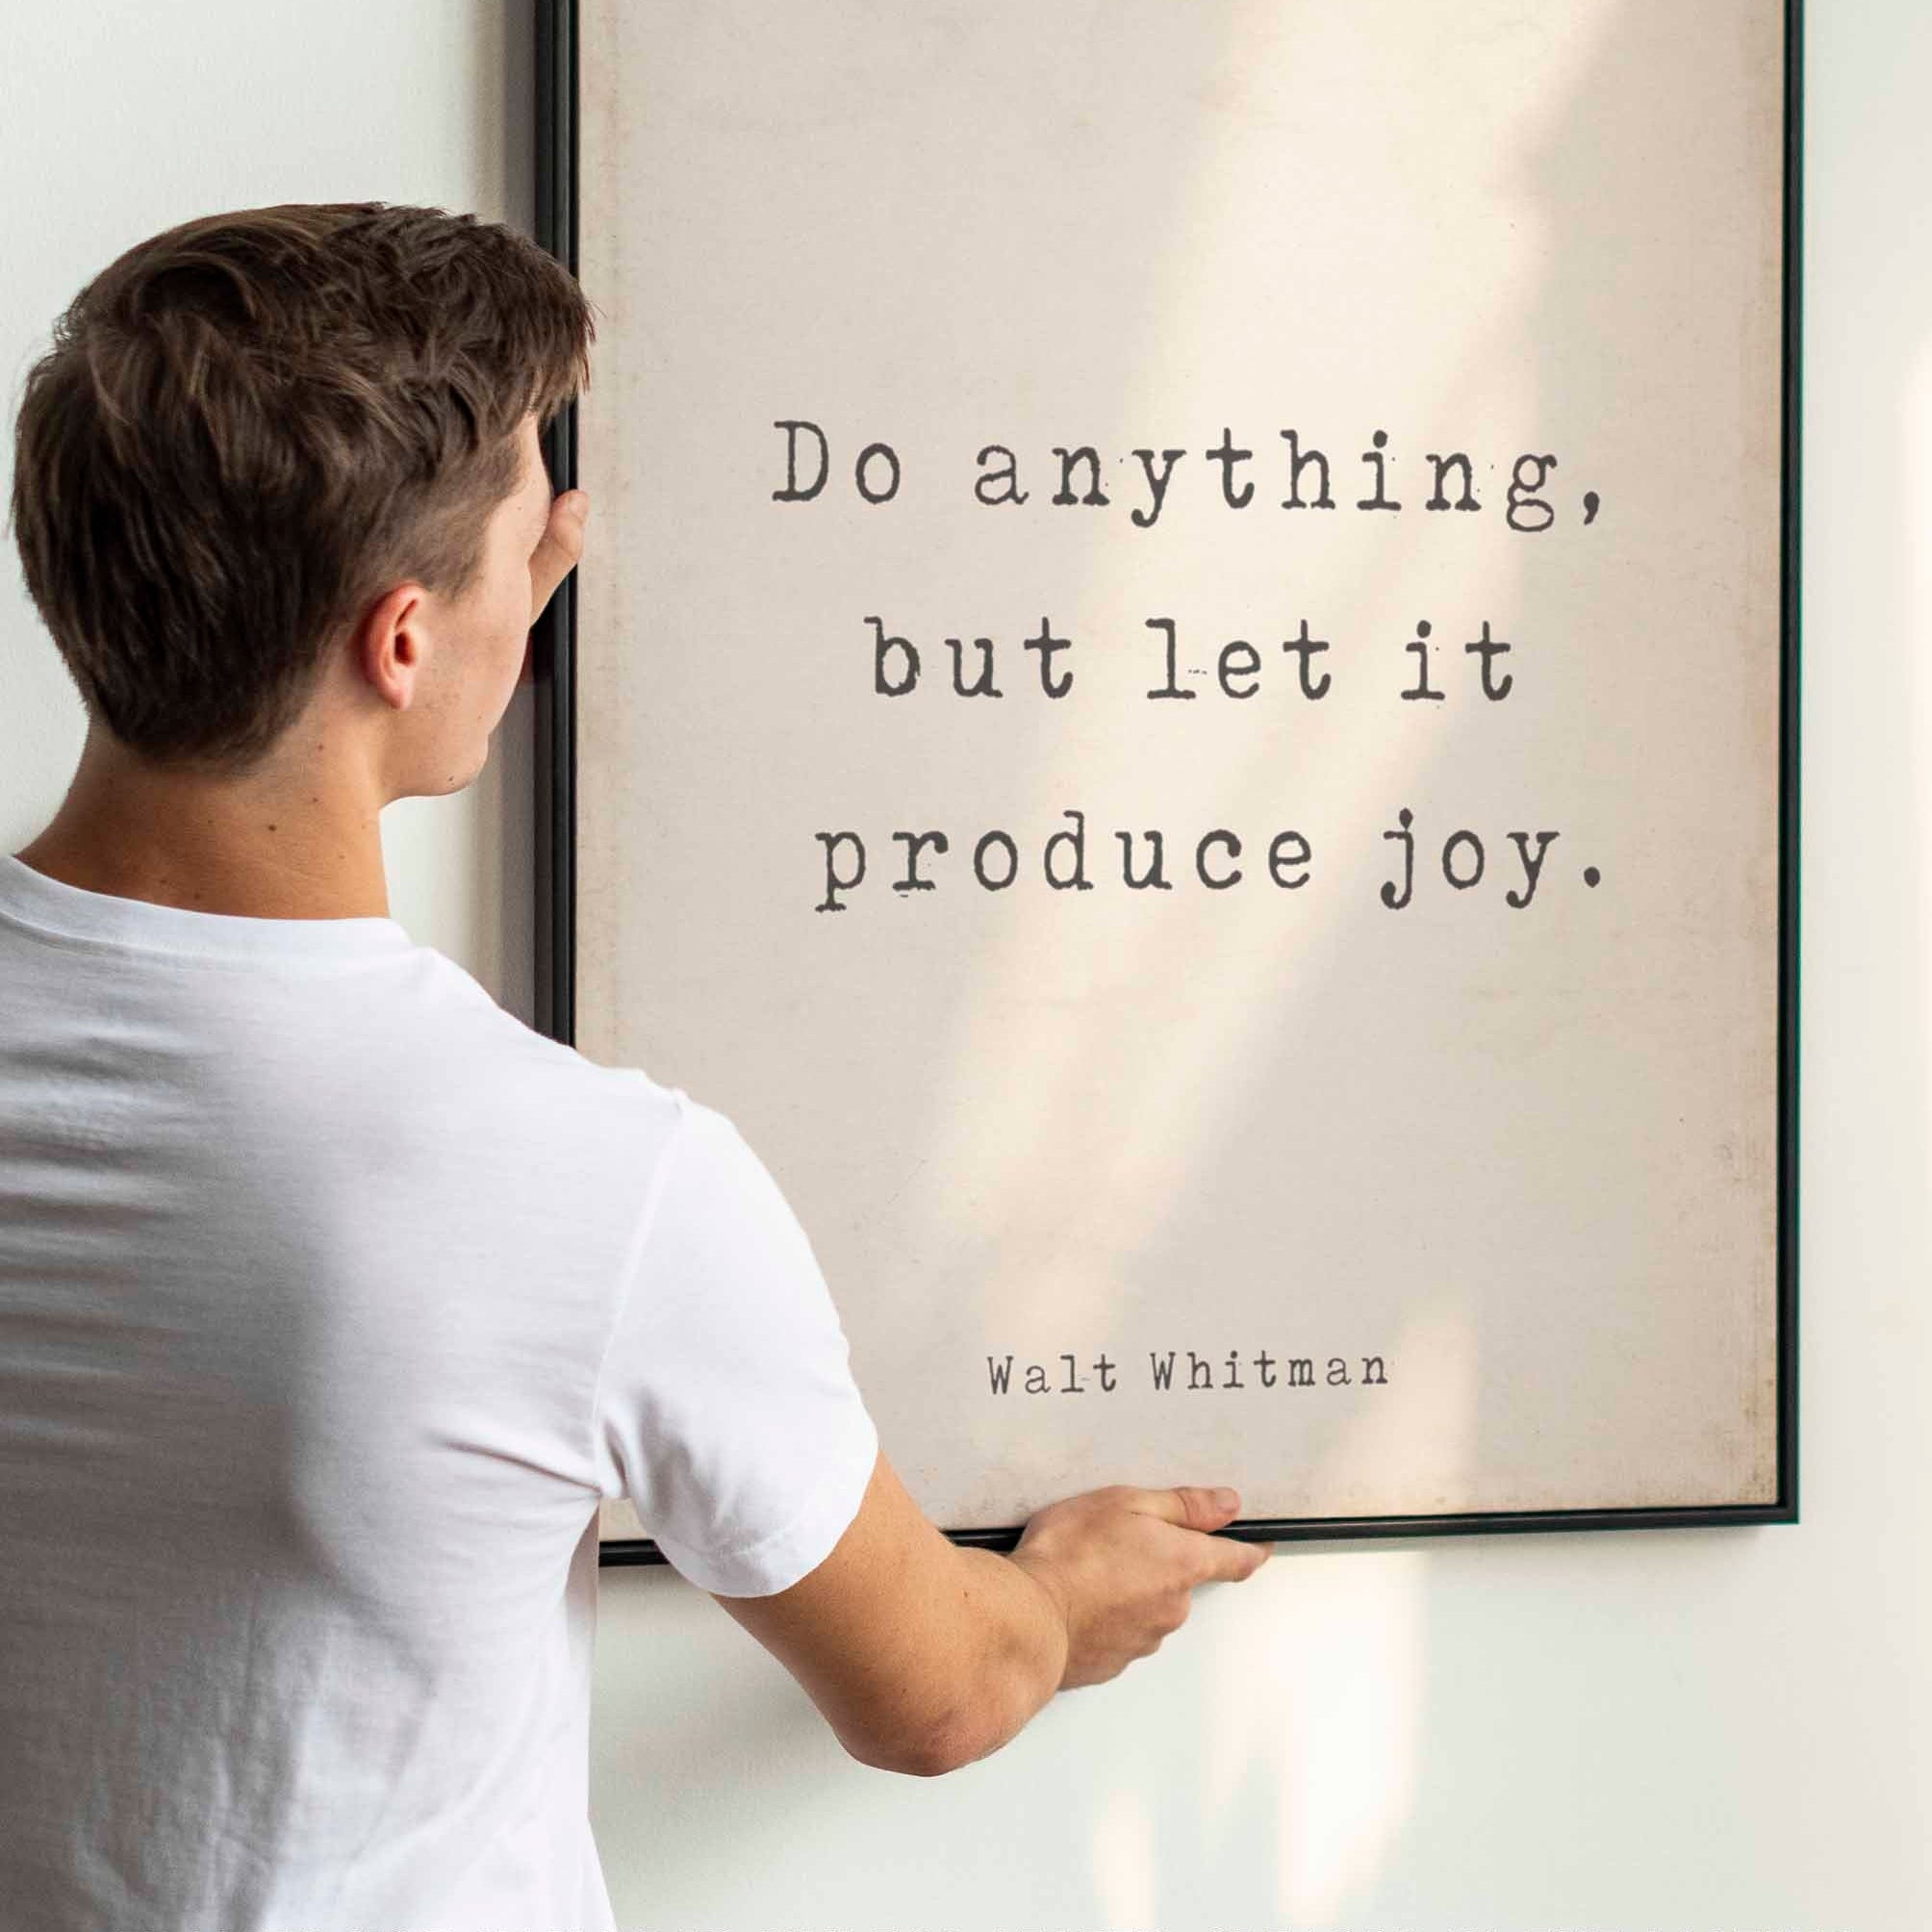 Walt Whitman Quote Print Do Anything, But Let It Produce Joy Inspirational Print